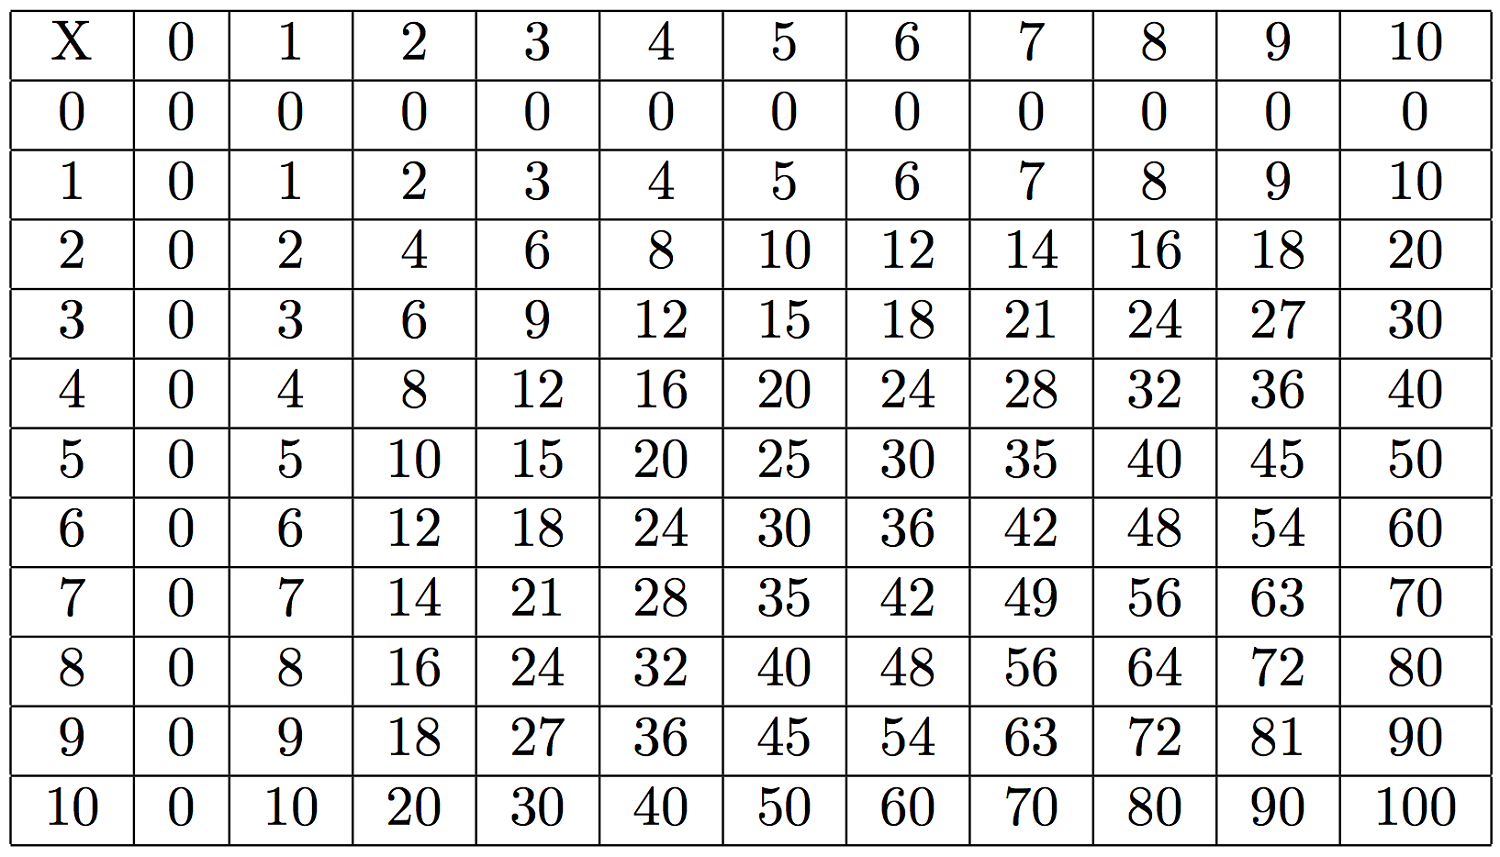 Large Multiplication Table To Train Memory | Activity Shelter intended for Large Printable Multiplication Table